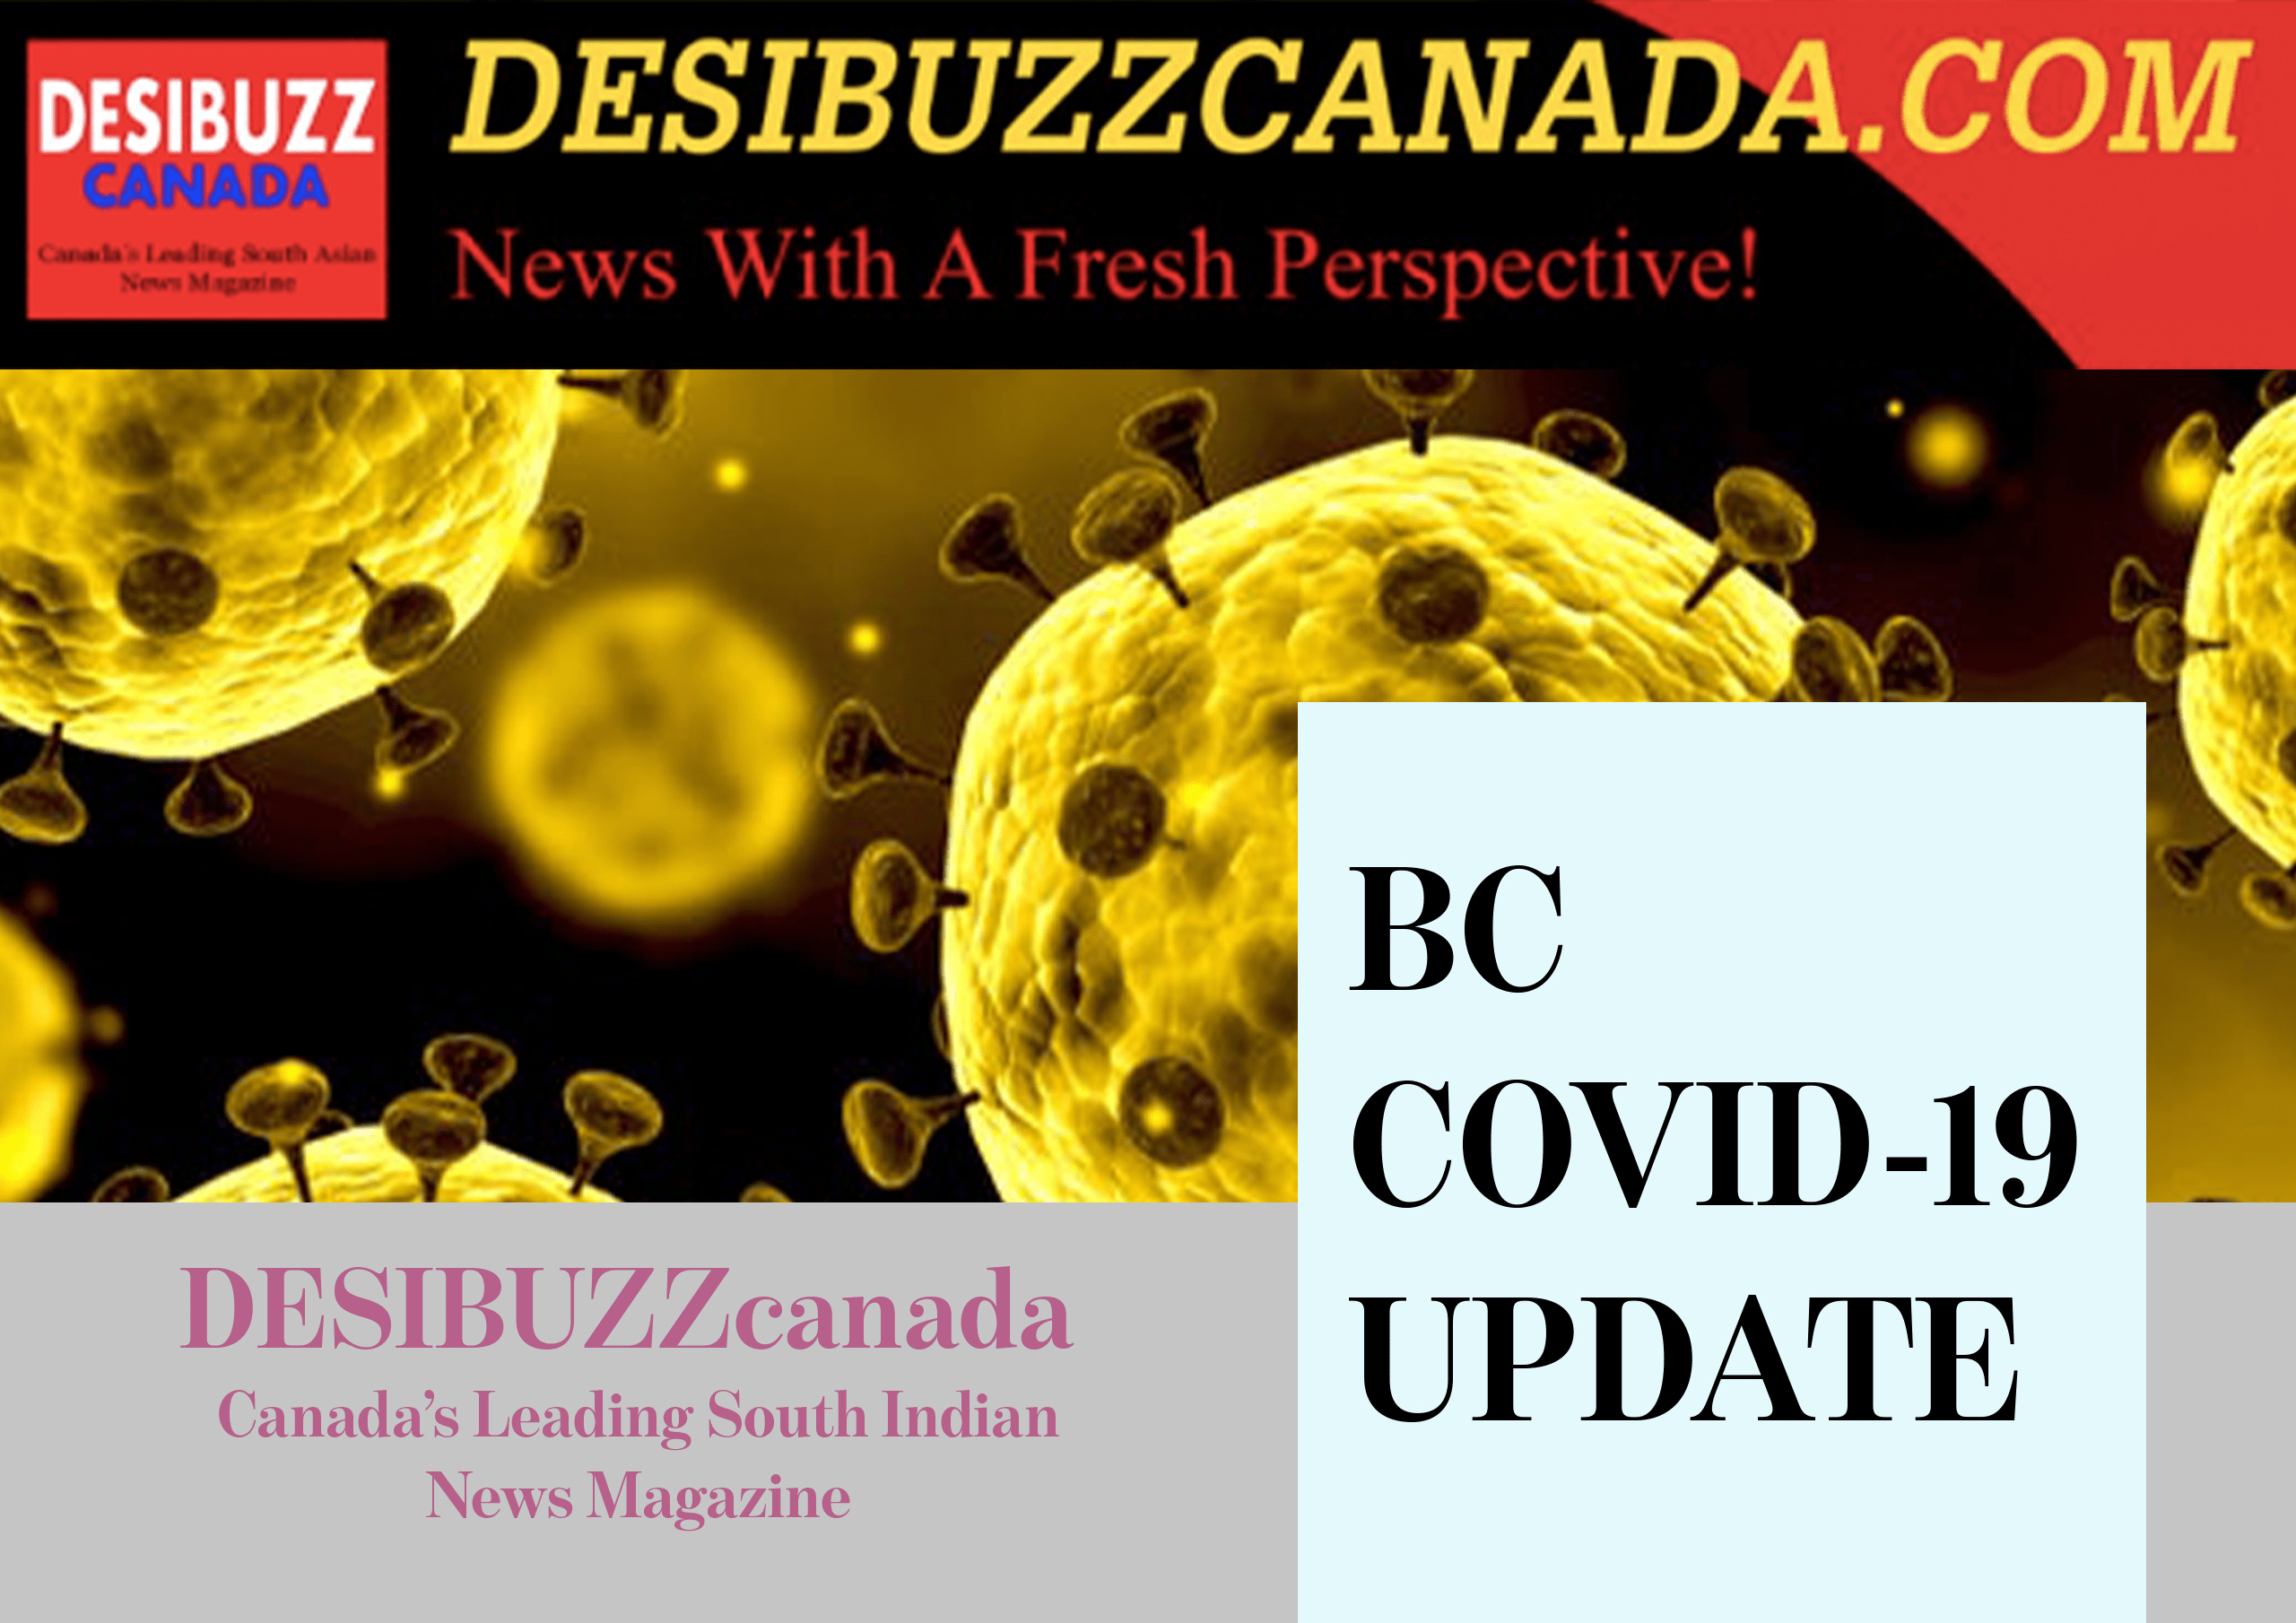 BC COVID-19 DAILY UPDATE: Cases Remain Below 200 With One New Death Reported Friday